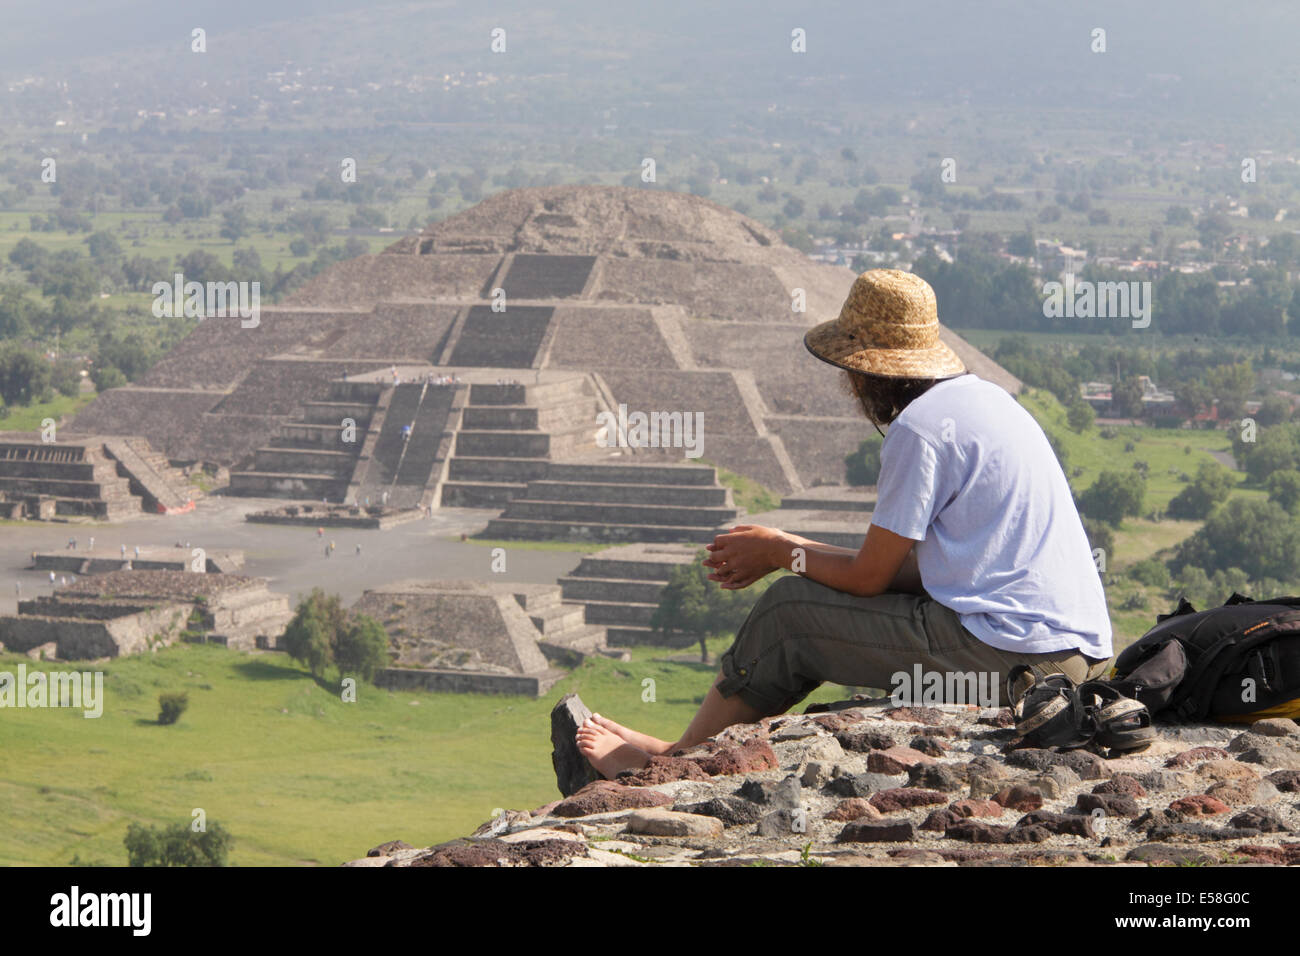 A tourist atop the Pyramid of the Sun gazes at the Pyramid of the Moon in the distance, Teotihuacan, Mexico. Stock Photo